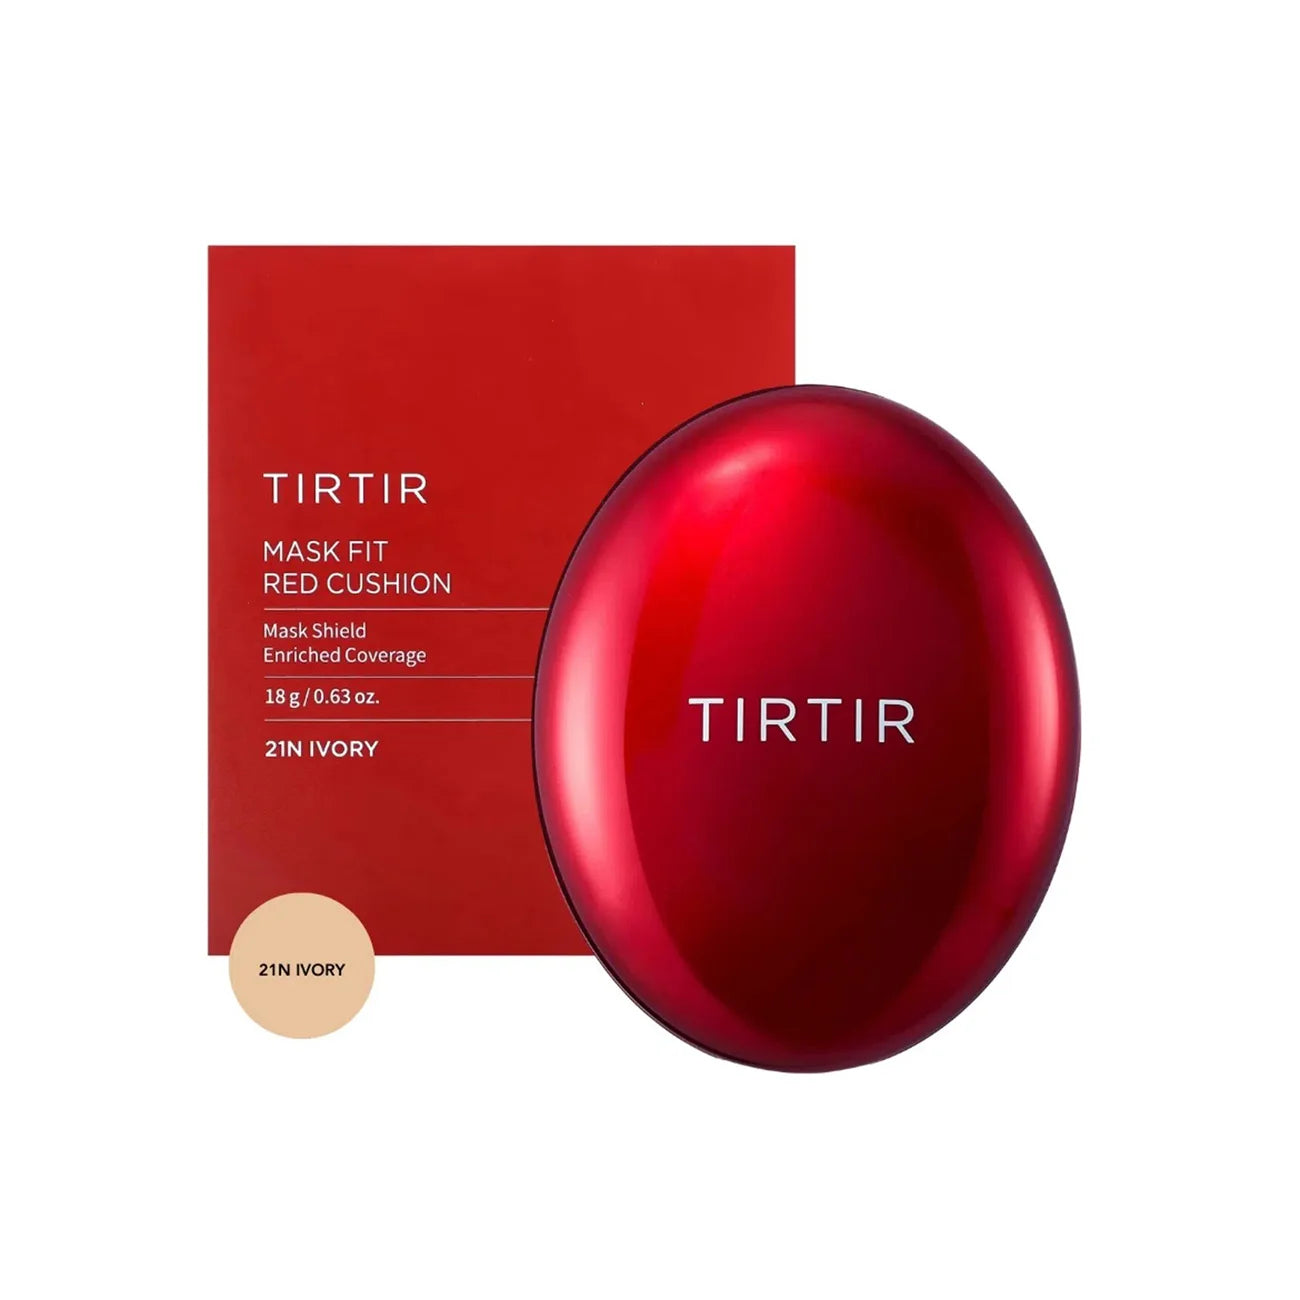 TIRTIR Mask Fit Red Cushion 21N Ivory Korean skincare cosmetics makeup foundation full coverage with SPF semi-matte finish K Beauty World